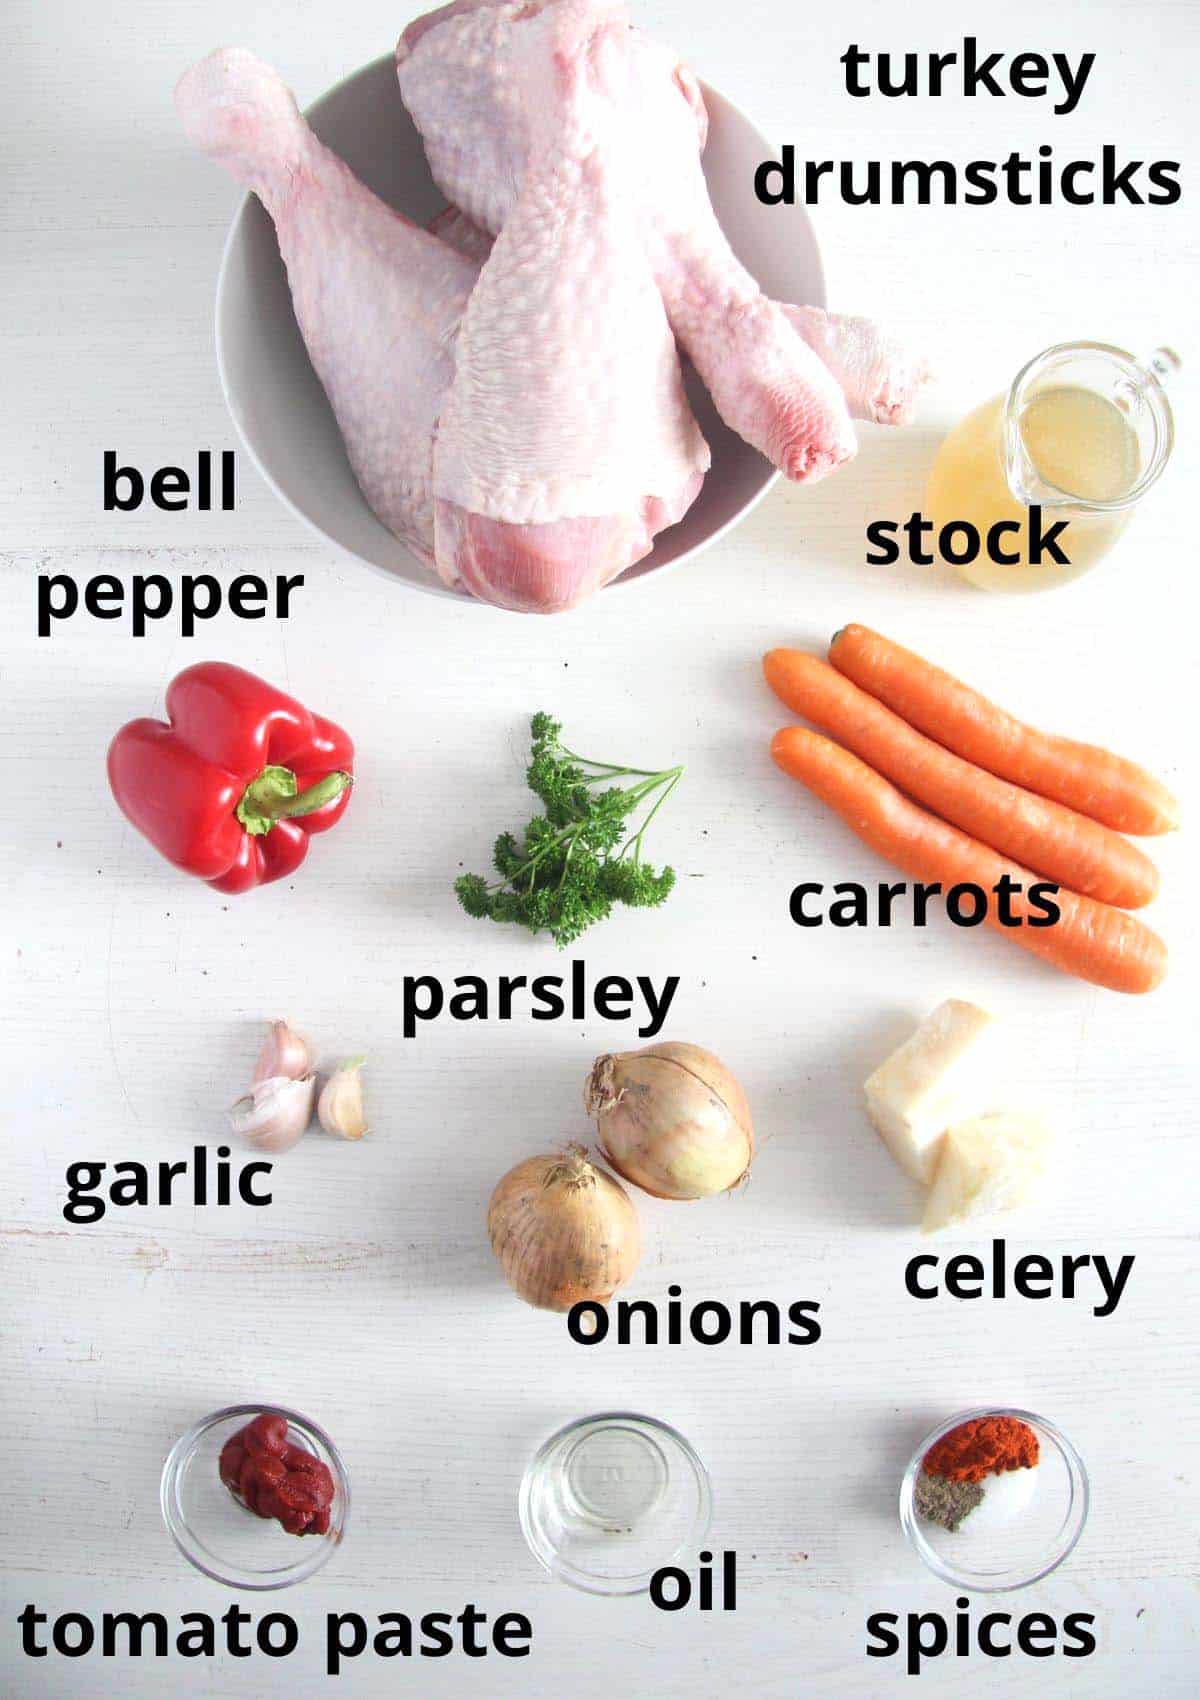 listed ingredients for cooking turkey drumsticks in the oven. 